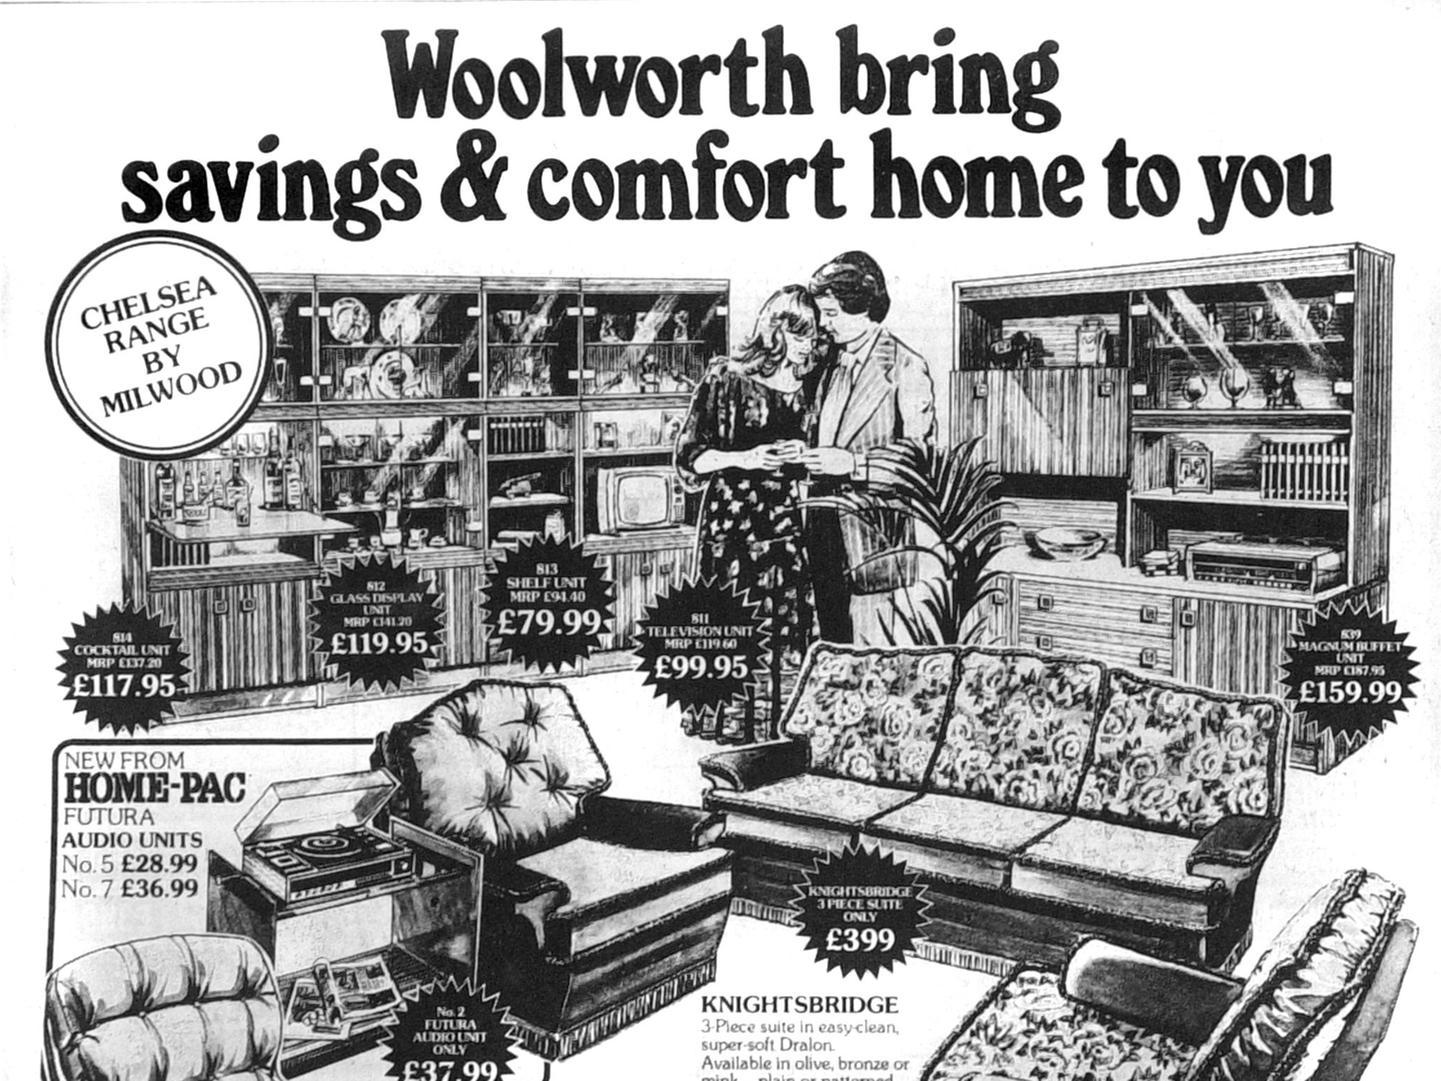 Based at 140-142 Briggate, Woolworth's promised customers 'the life you want - at the prices you want'. Credit facilities were available on most purchases over 30 pounds.